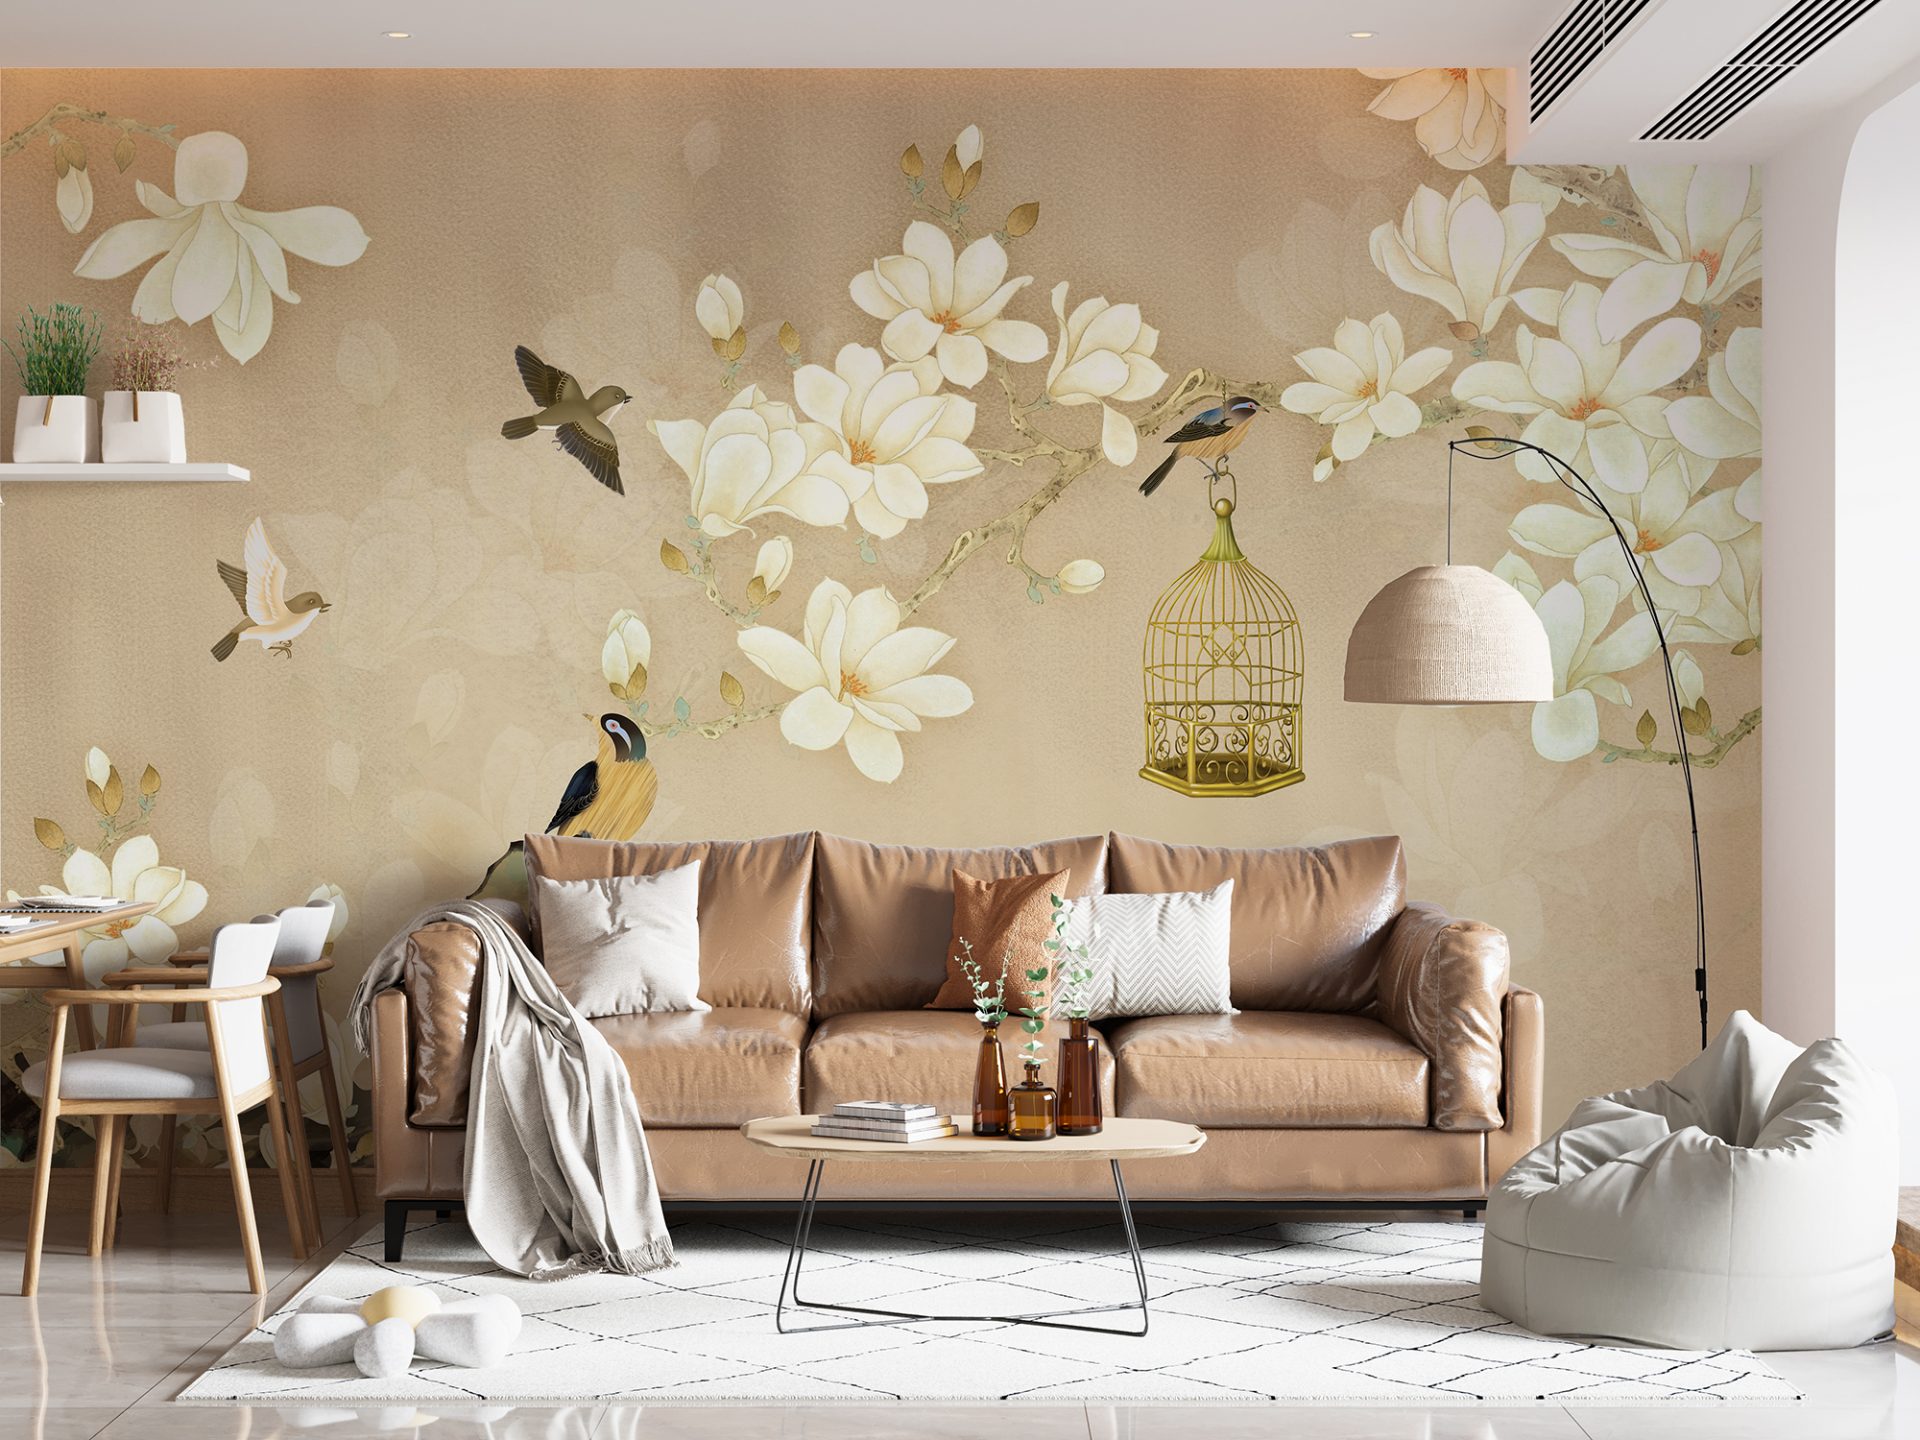 999STORE Designer Beautiful 3D Tiles classwall Modern Living Room Wall Paper ,Wallpaper for Office(Non-Woven_6X8 Feet) Non8x60332 : Amazon.in: Home &  Kitchen